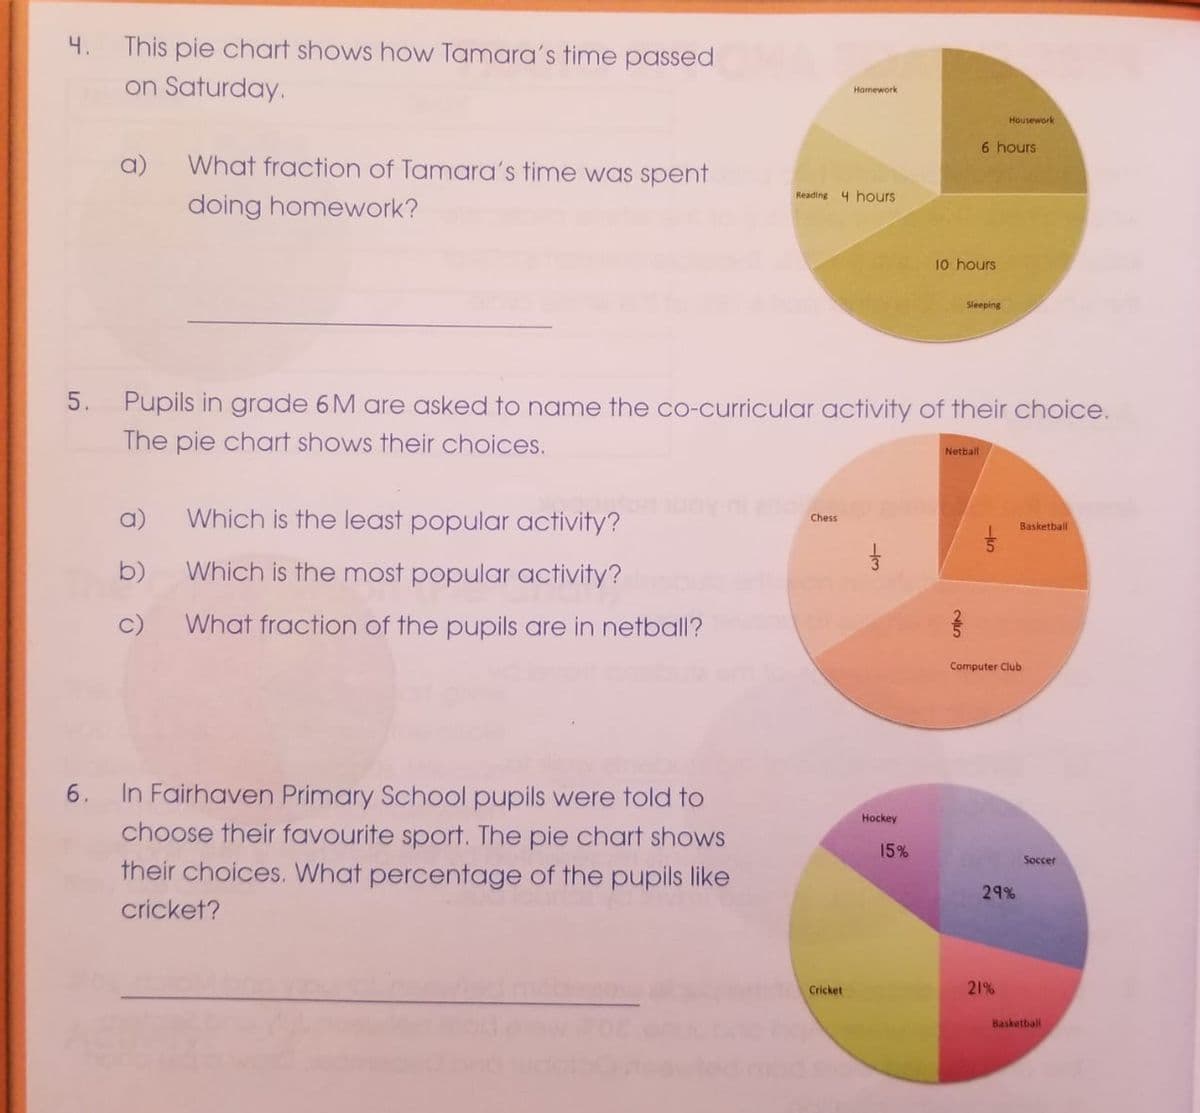 4.
This pie chart shows how Tamara's time passed
on Saturday.
Homework
Housework
6 hours
a)
What fraction of Tamara's time was spent
Reading 4 hours
doing homework?
10 hours
Sleeping
5. Pupils in grade 6M are asked to name the co-curricular activity of their choice.
The pie chart shows their choices.
Netball
a)
Which is the least popular activity?
Chess
Basketball
b)
Which is the most popular activity?
c)
What fraction of the pupils are in netball?
Computer Club
6.
In Fairhaven Primary School pupils were told to
Hockey
choose their favourite sport. The pie chart shows
15%
Soccer
their choices. What percentage of the pupils like
29%
cricket?
Cricket
21%
Basketbalil
